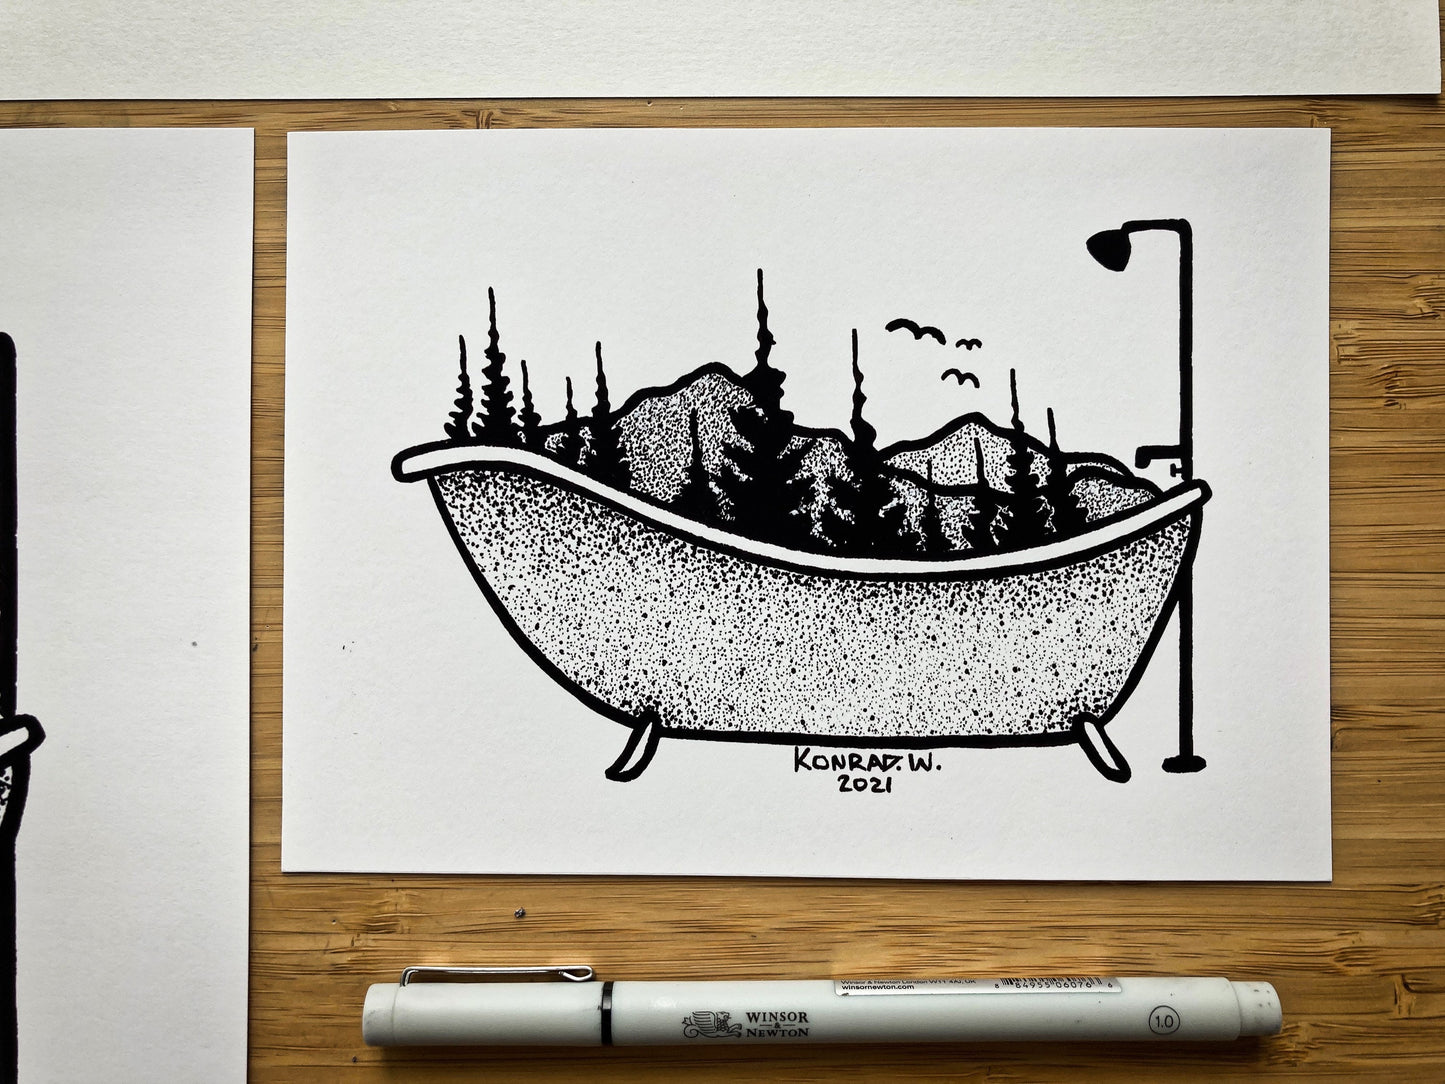 Clawfoot Bathtub - Nature Themed Pen and Ink PRINT